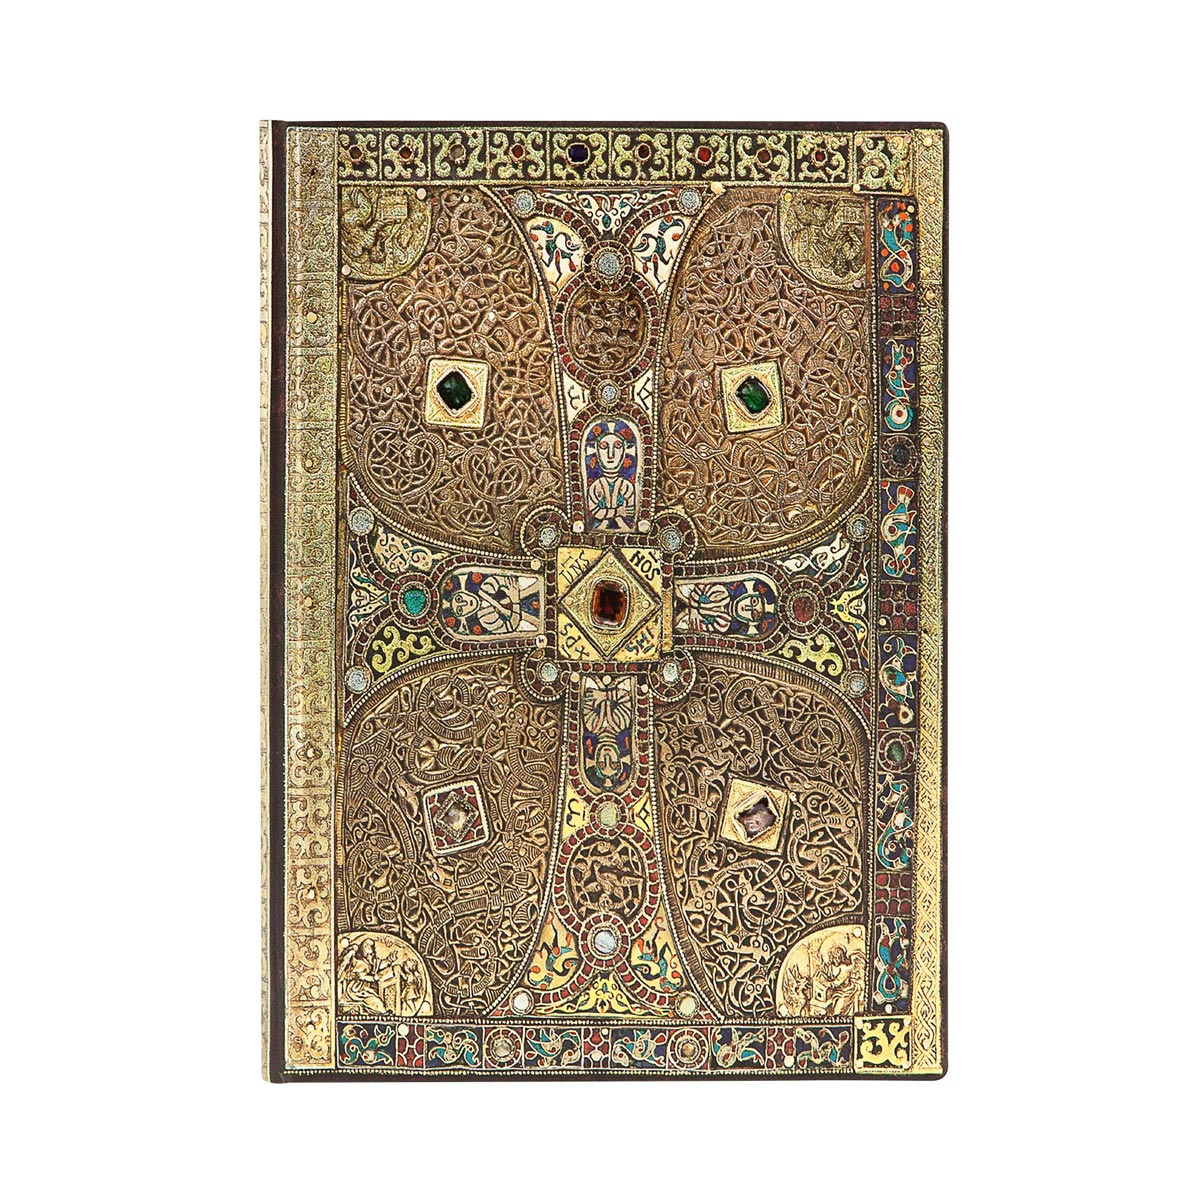 Paperblanks Flexis Lindau Midi 5x7 Inch, Lined 240 pages